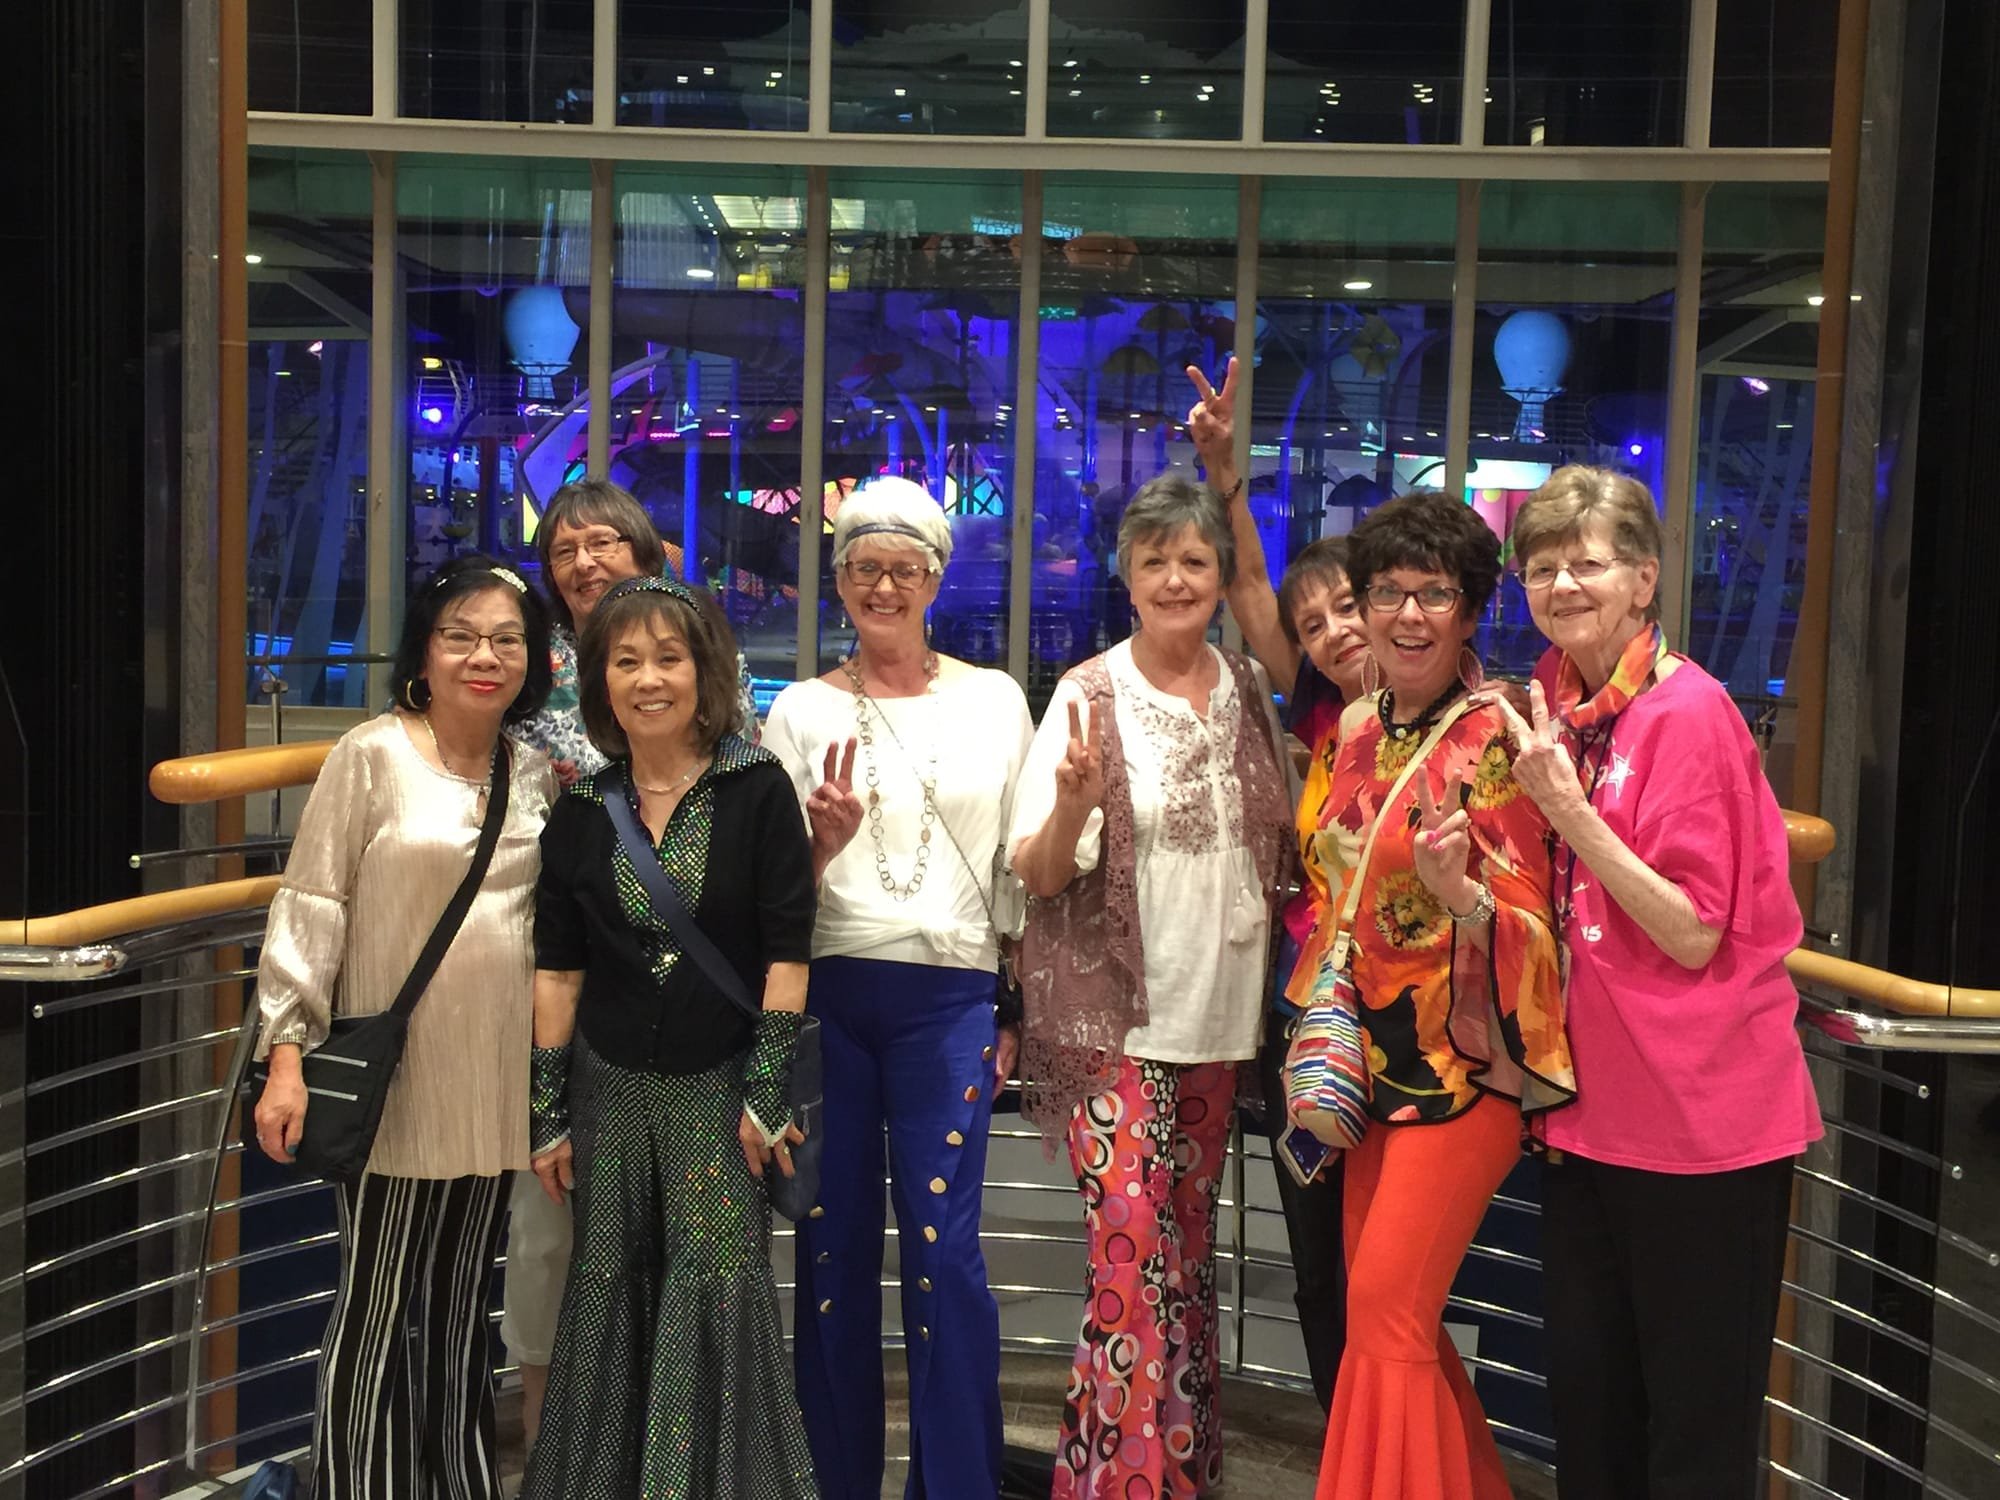 60s Night Party on Line Dance Cruise